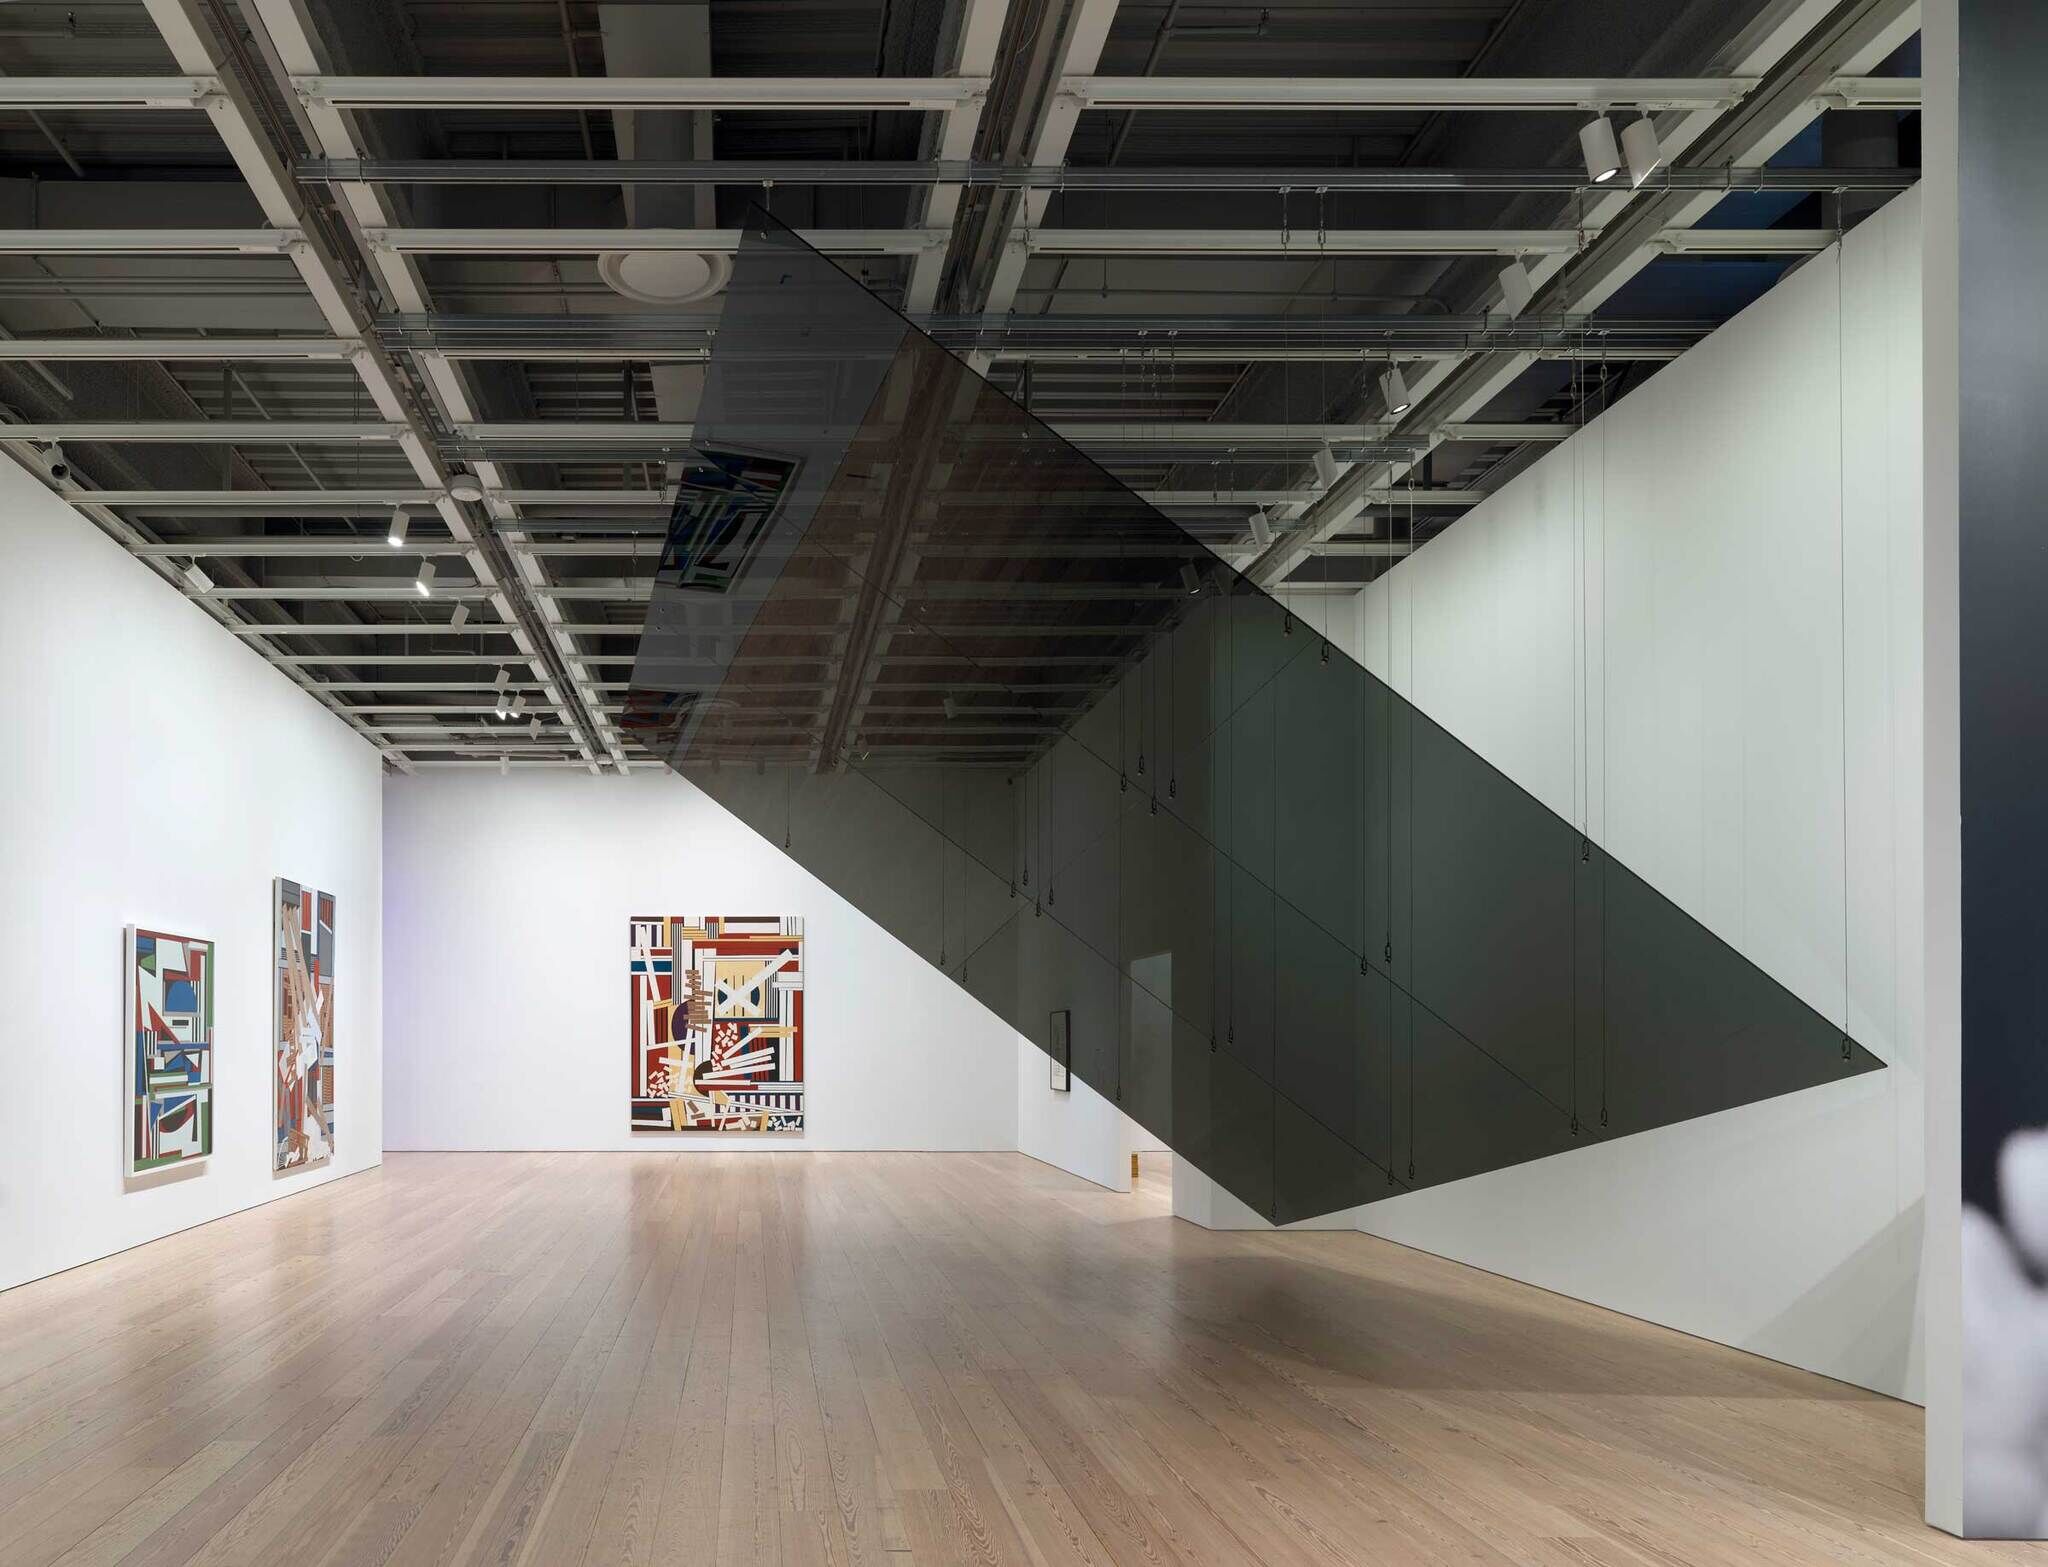 Modern art gallery interior with abstract paintings on white walls and a large, angled mirror installation reflecting the space.